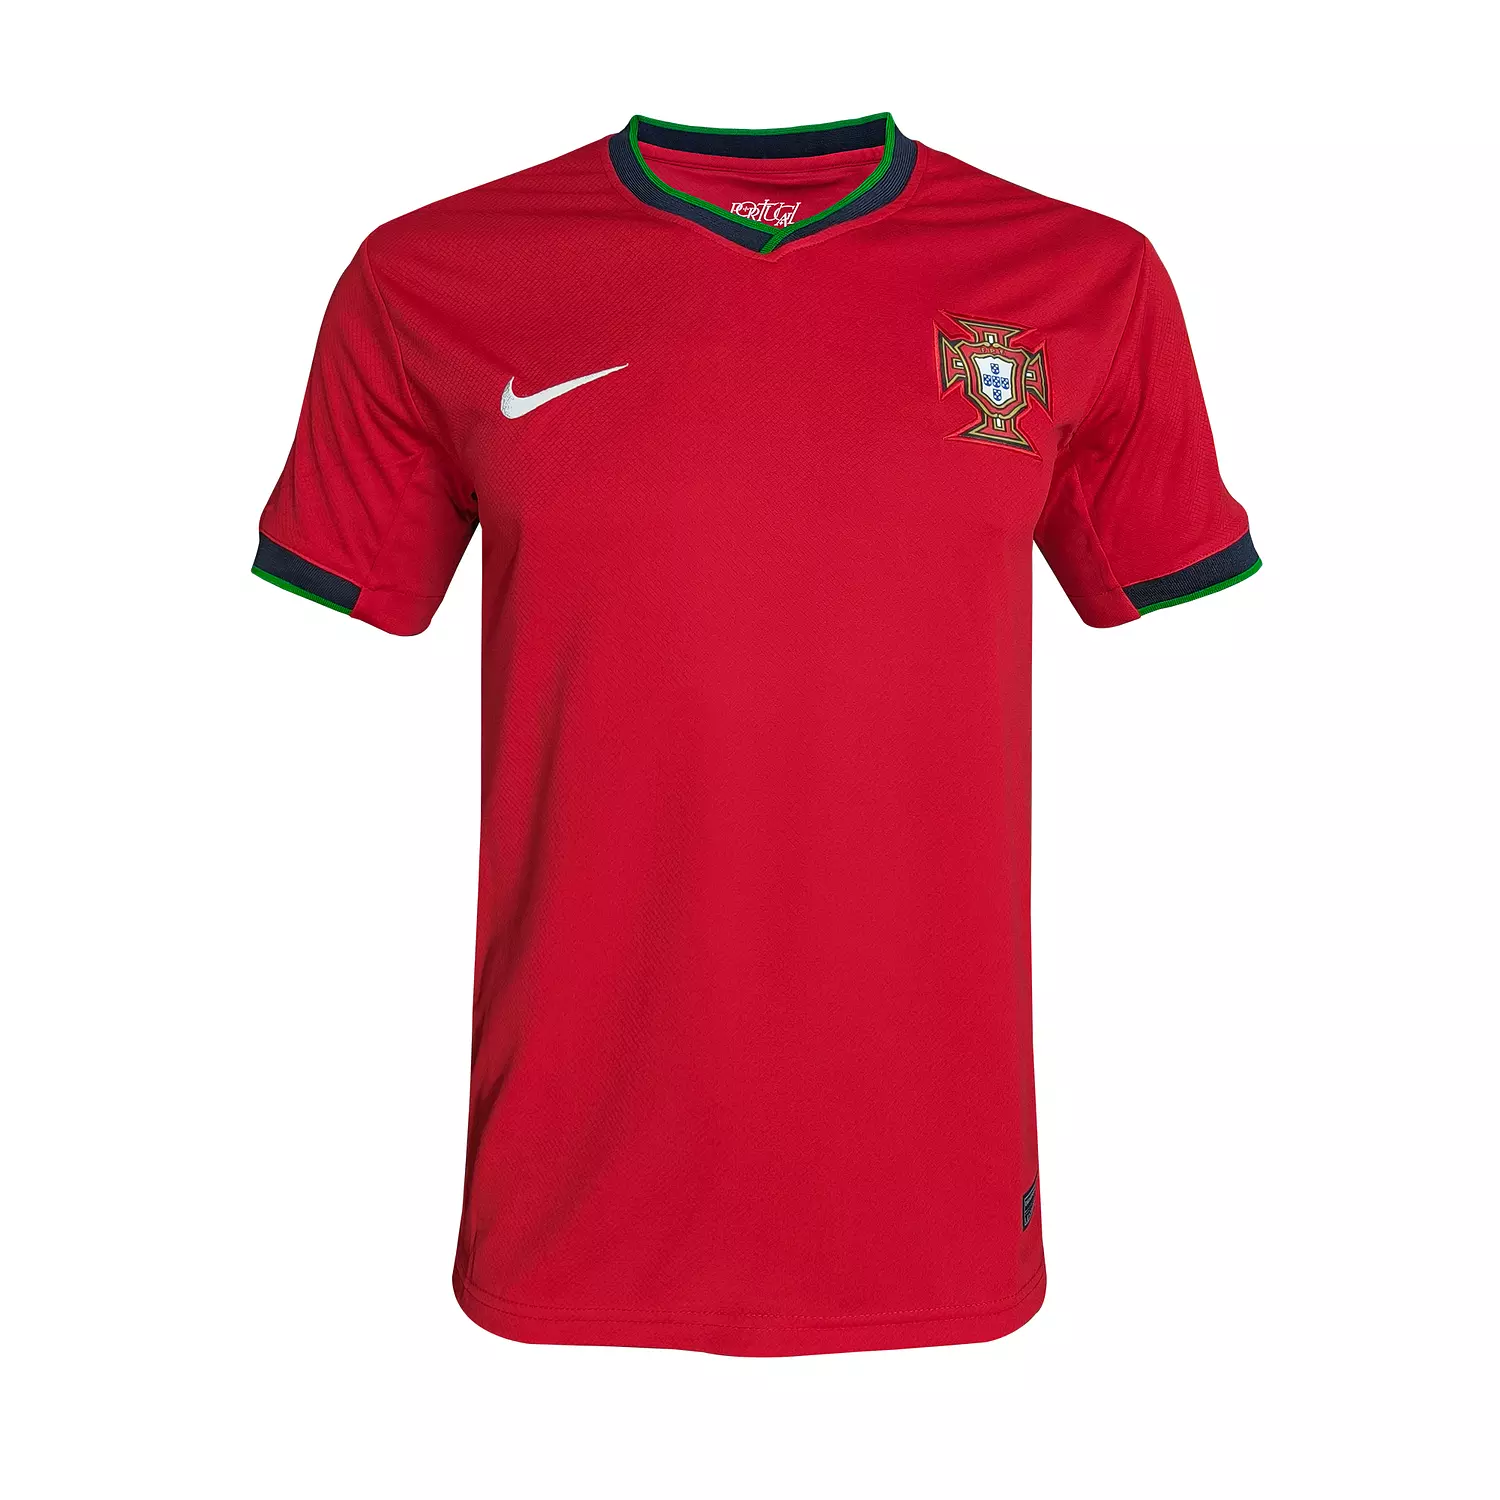 PORTUGAL EURO 24 - FANS hover image